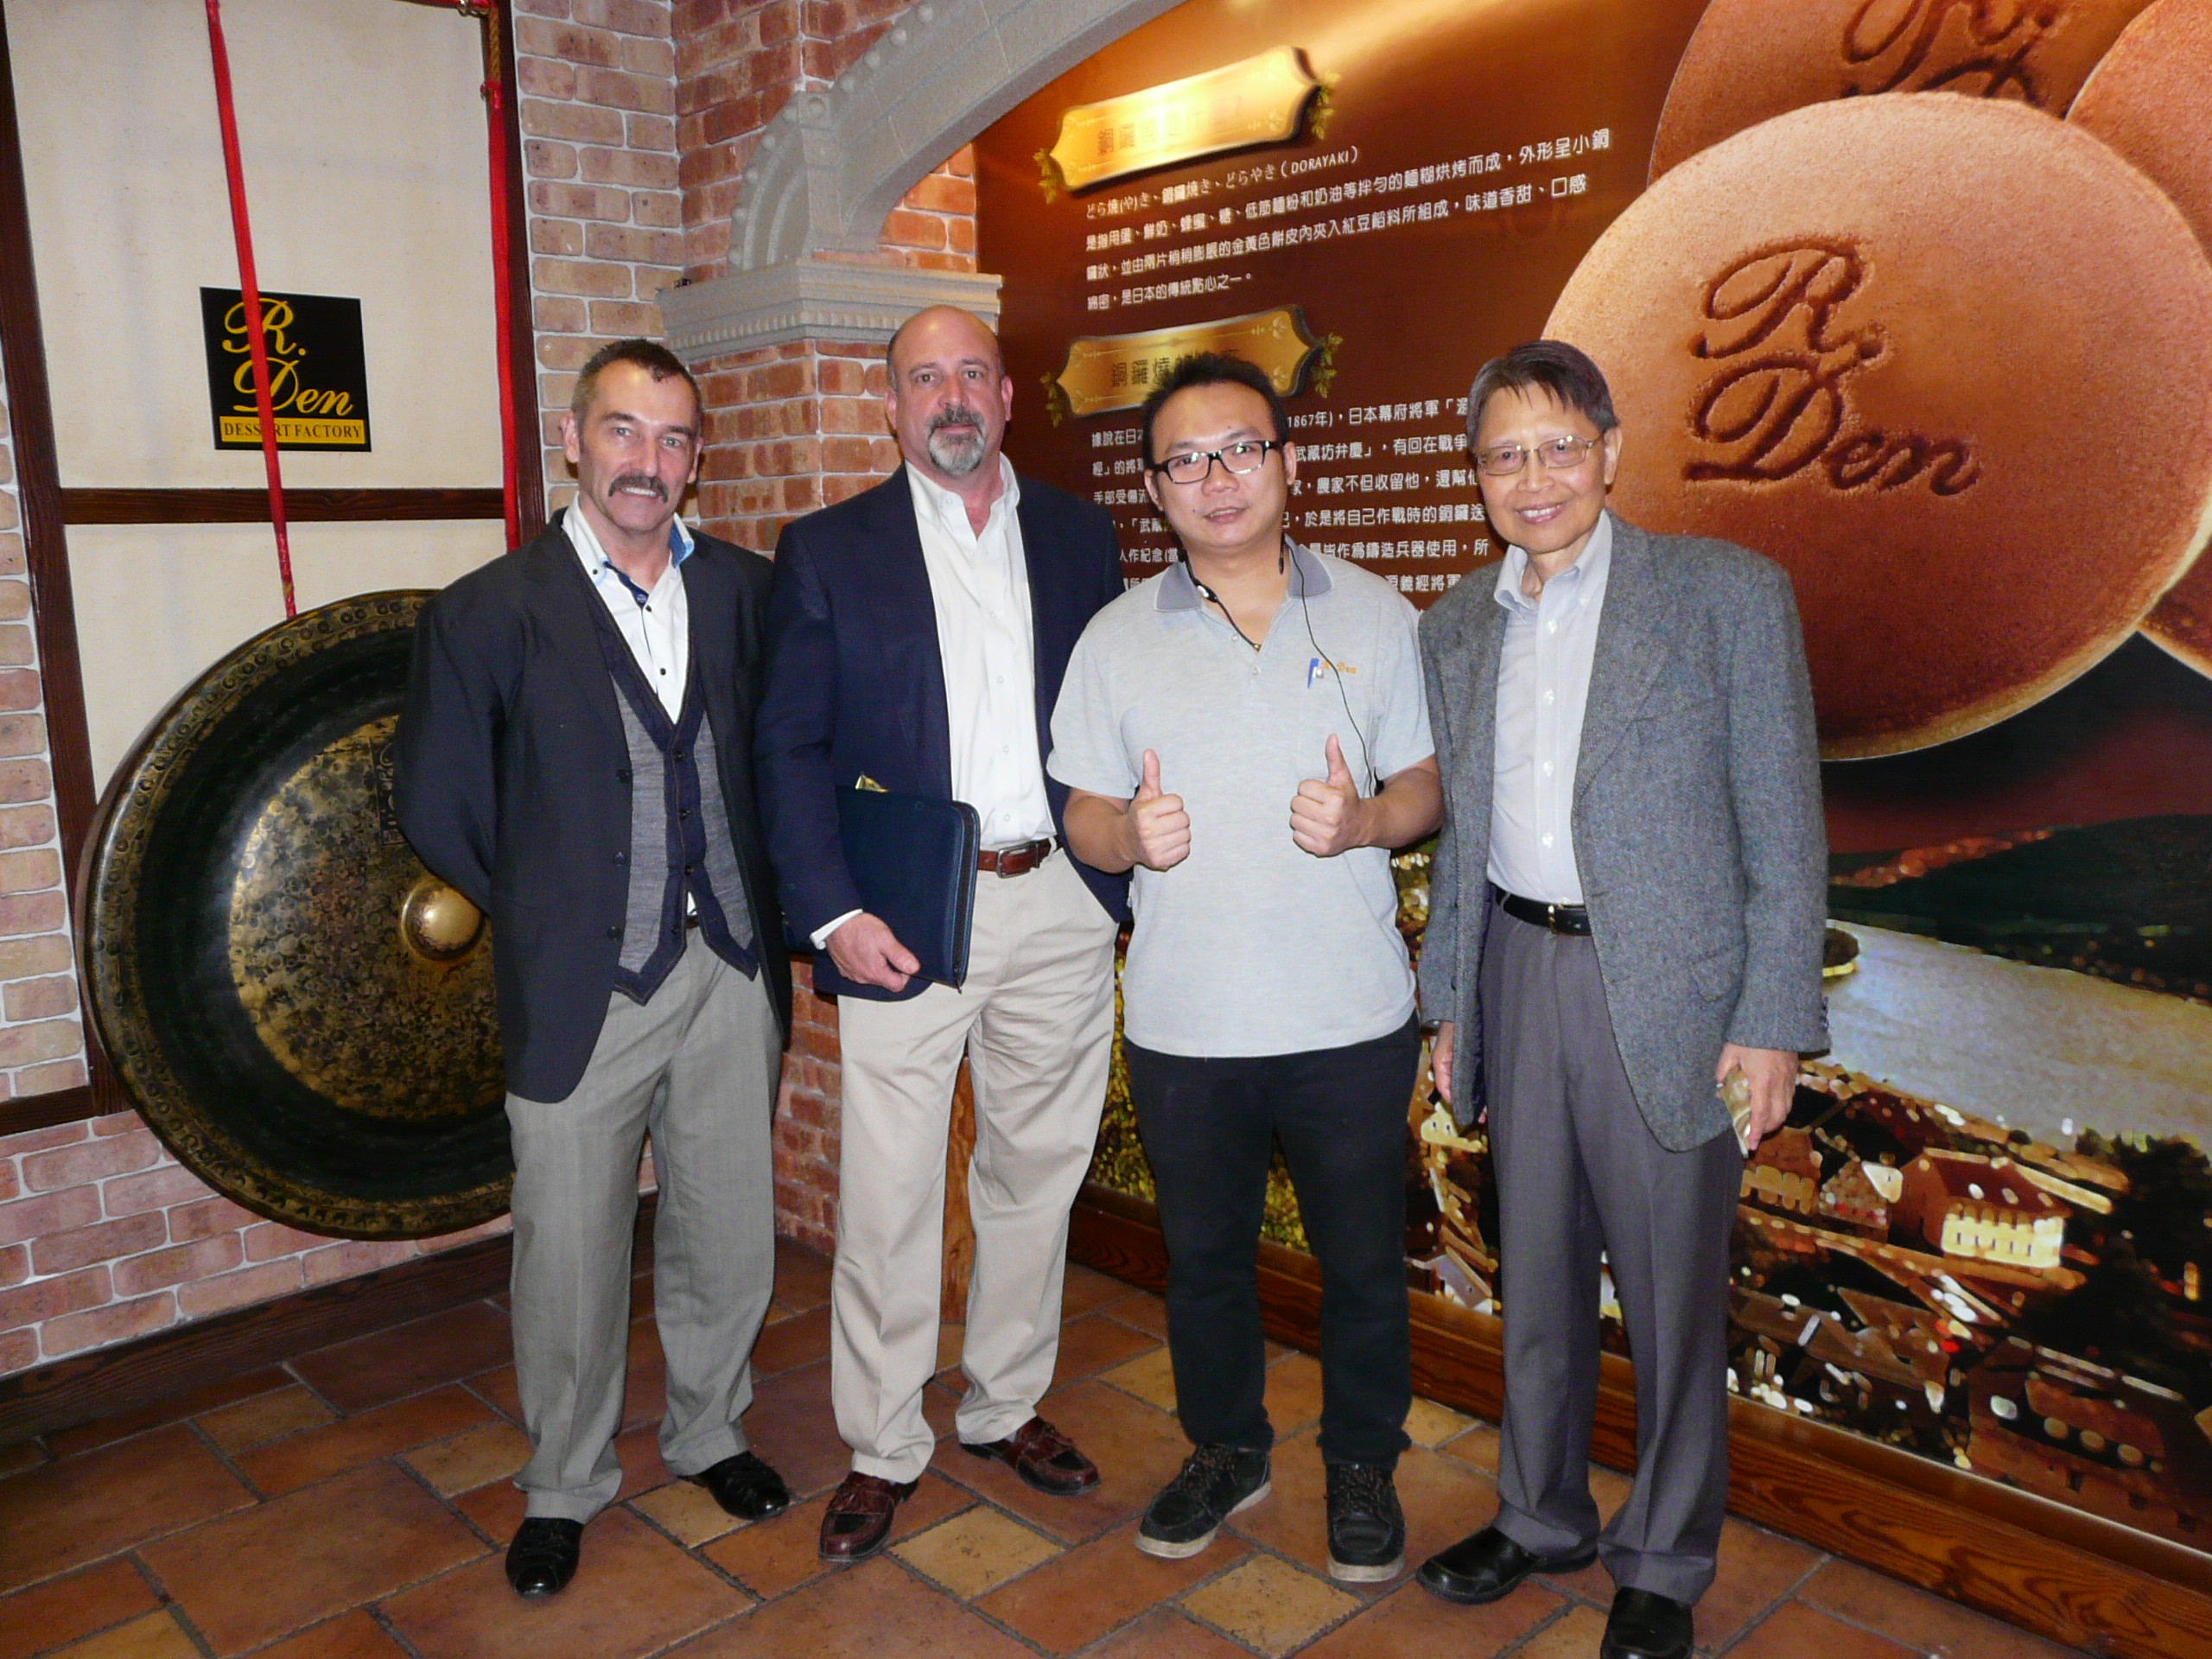 Ron Lu with USW colleagues and the owner of R Den Dessert Factory